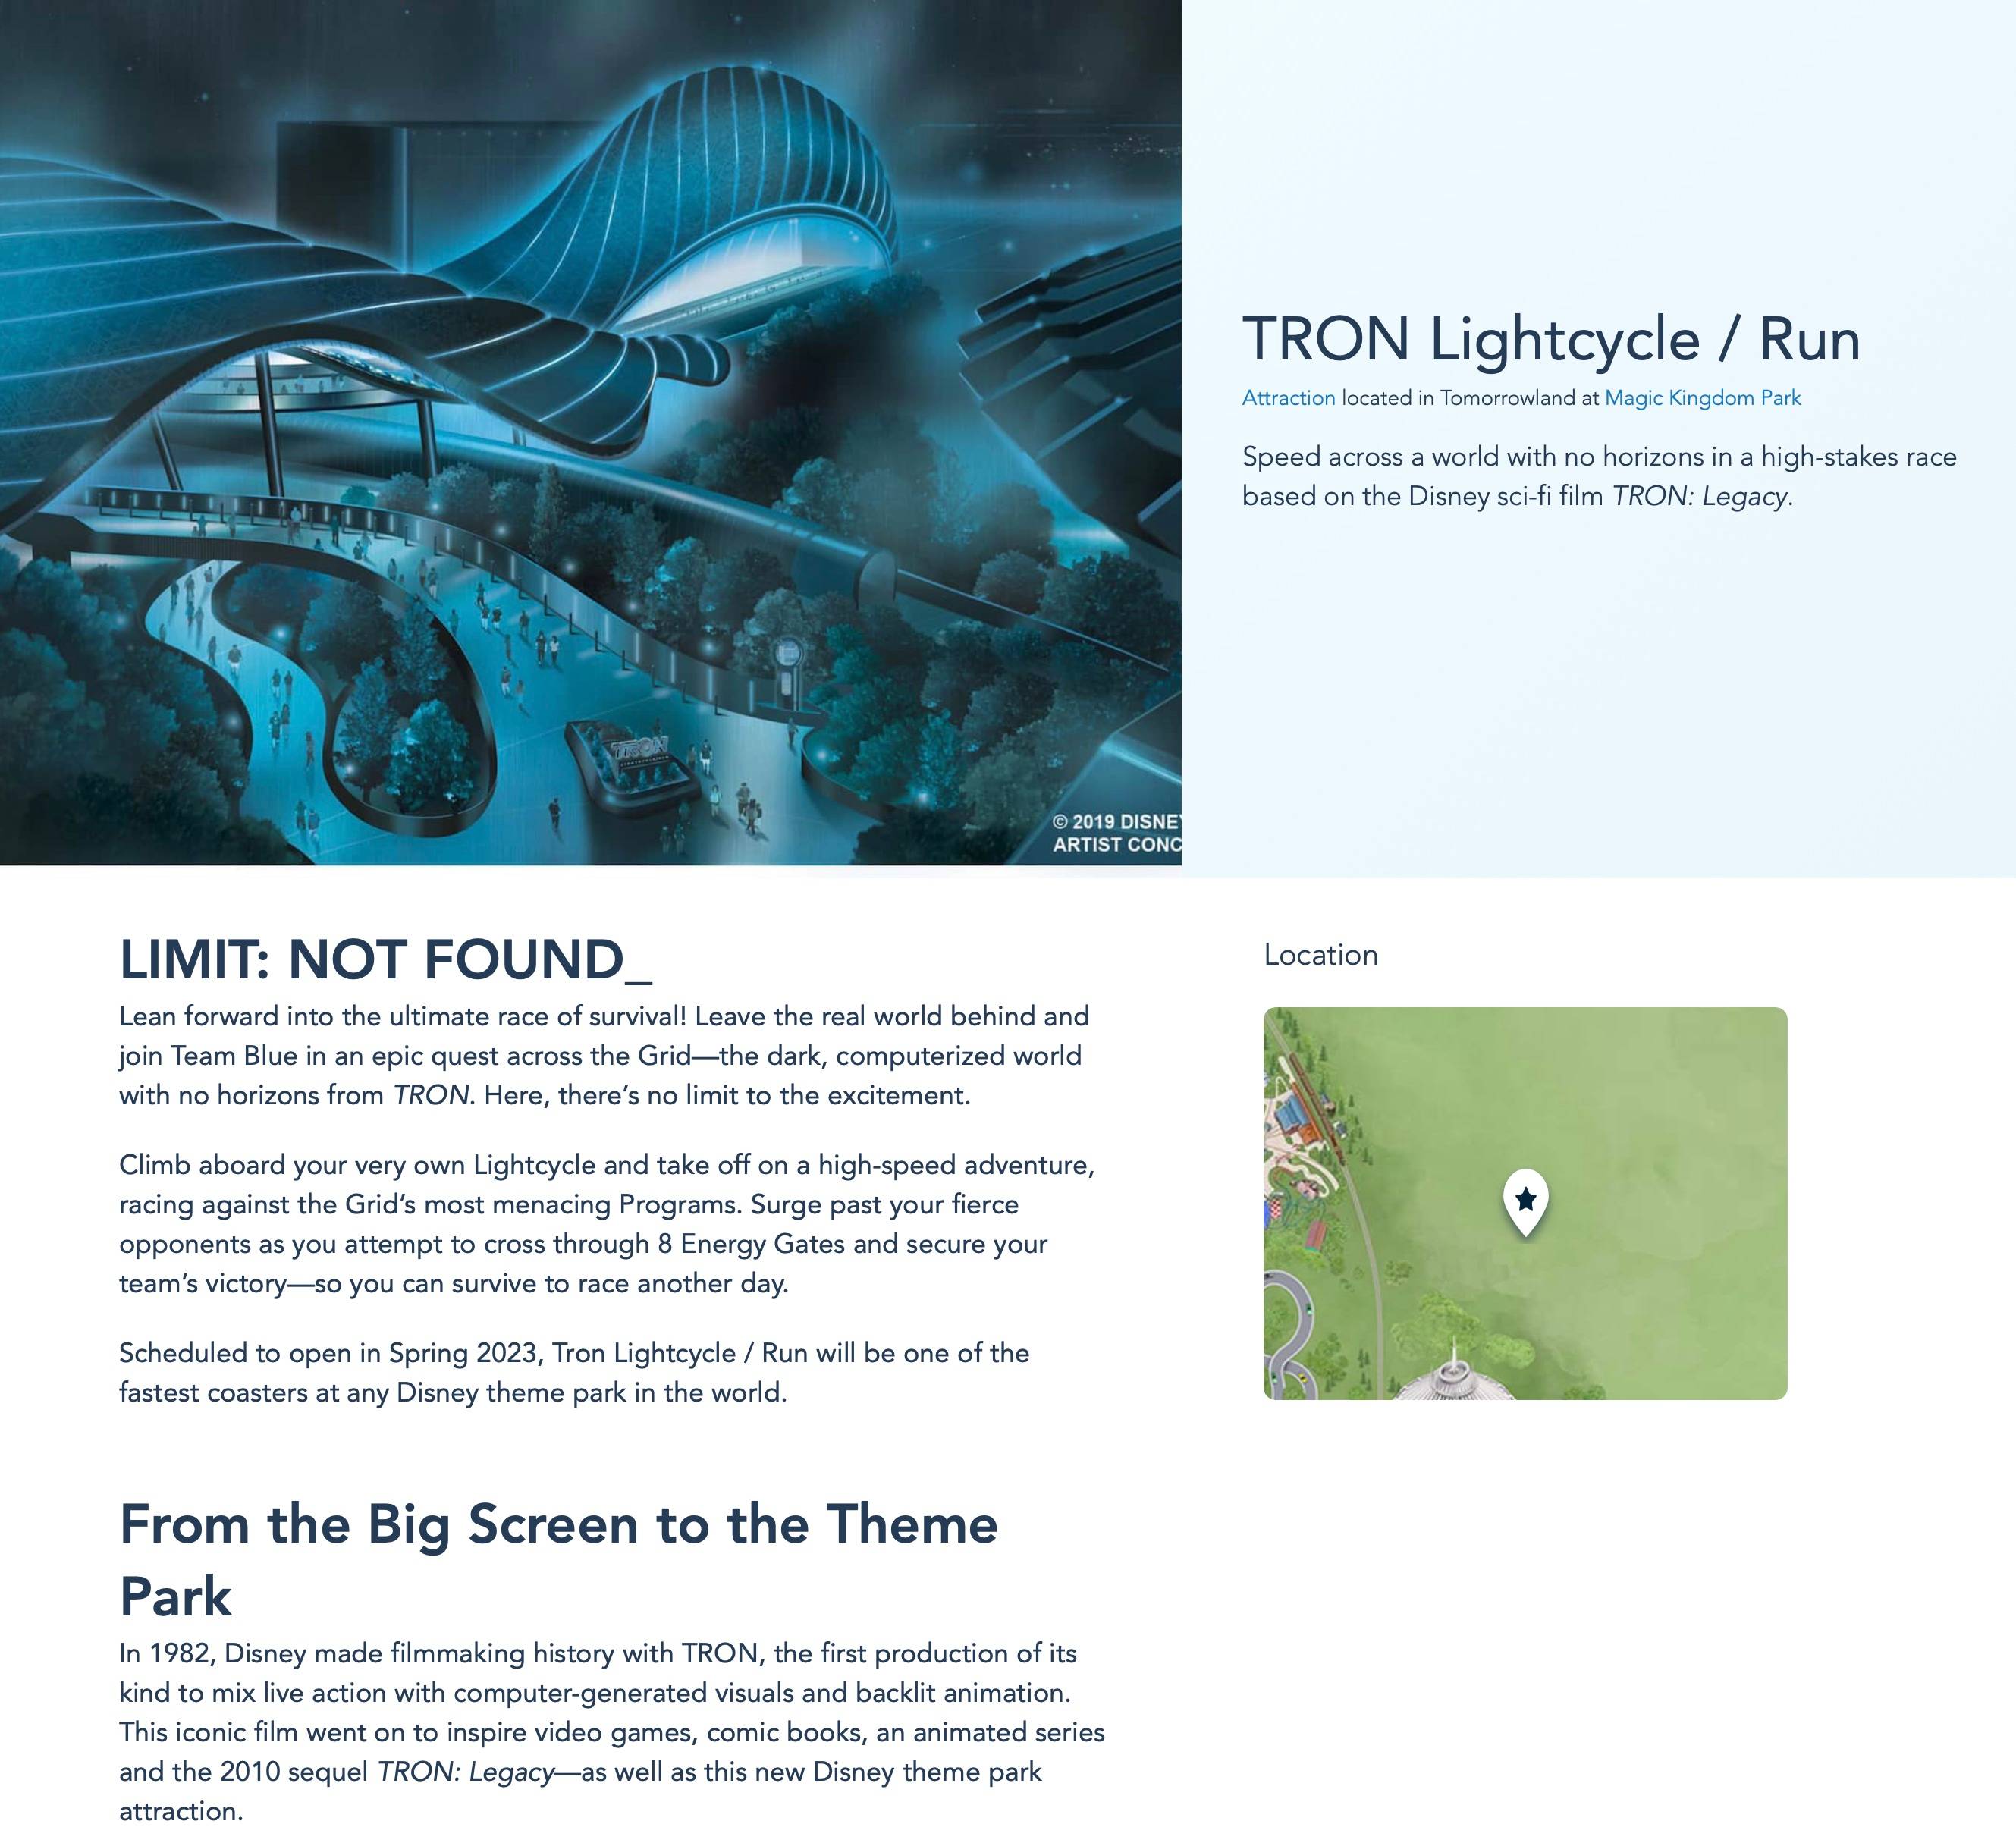 TRON Lightcycle Run page goes live on the Disney World website